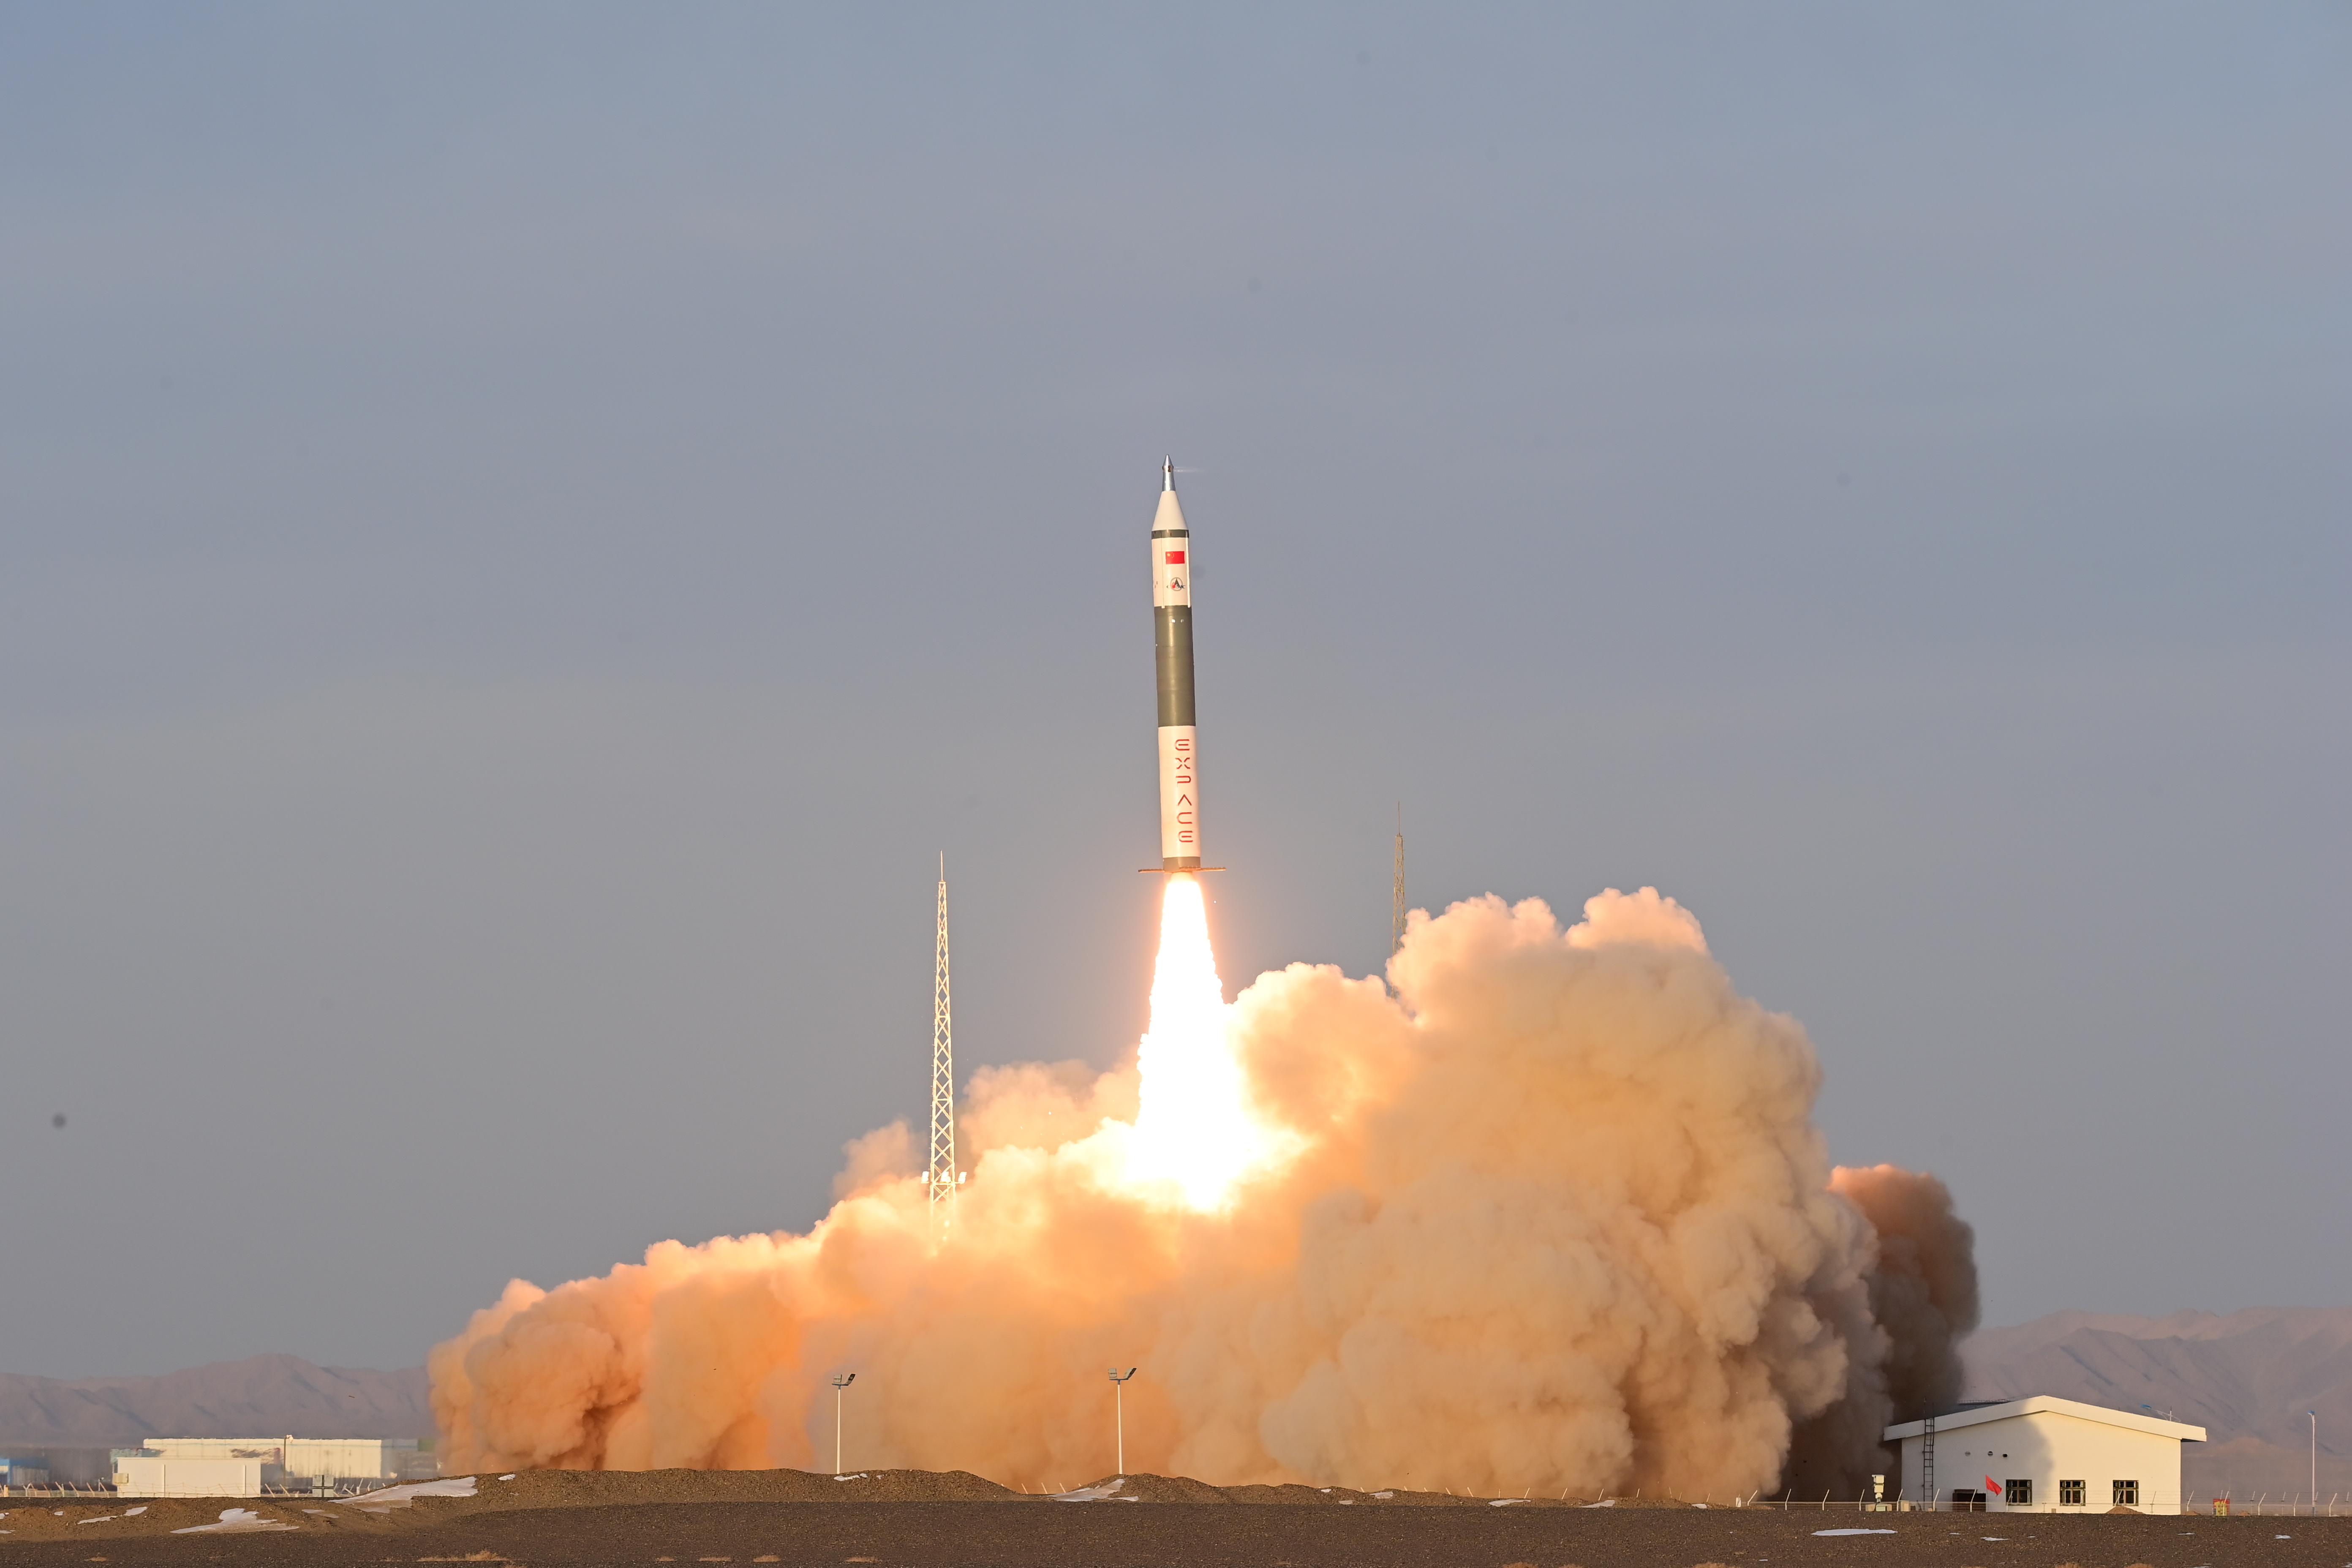 China launches its newest solid-fuel carrier rocket Kuaizhou 11 Y-2 at 09:15 a.m. (BJT) from the Jiuquan Satellite Launch Center in northwest China, December 7, 2022. /CGTN